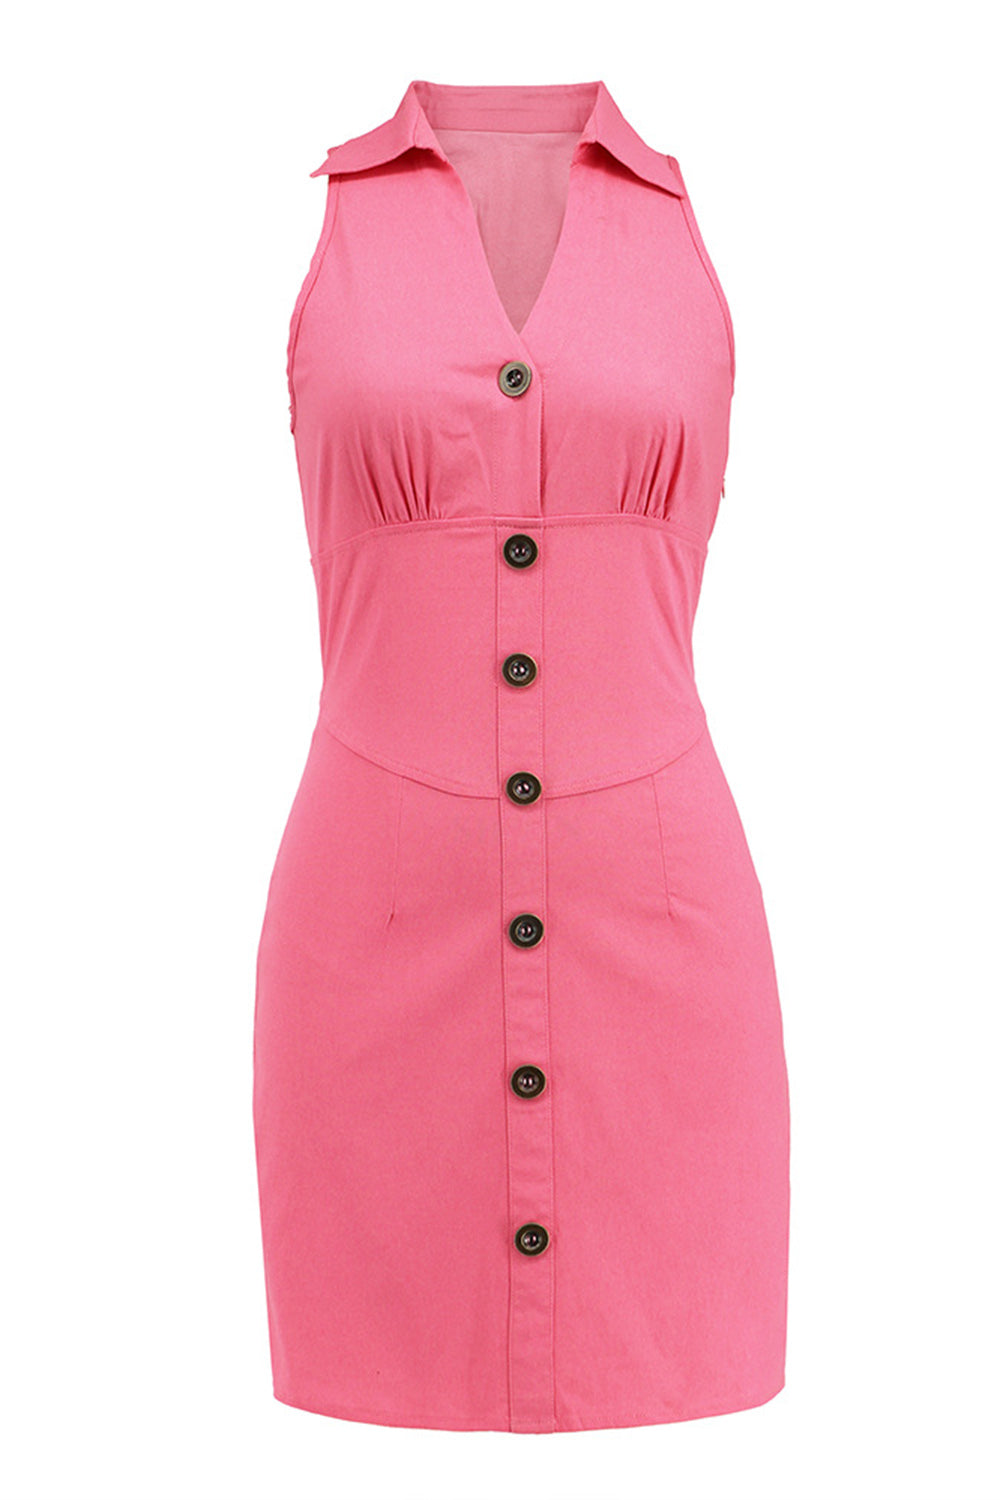 V-Neck Pink Bodycon Party Dress with Button